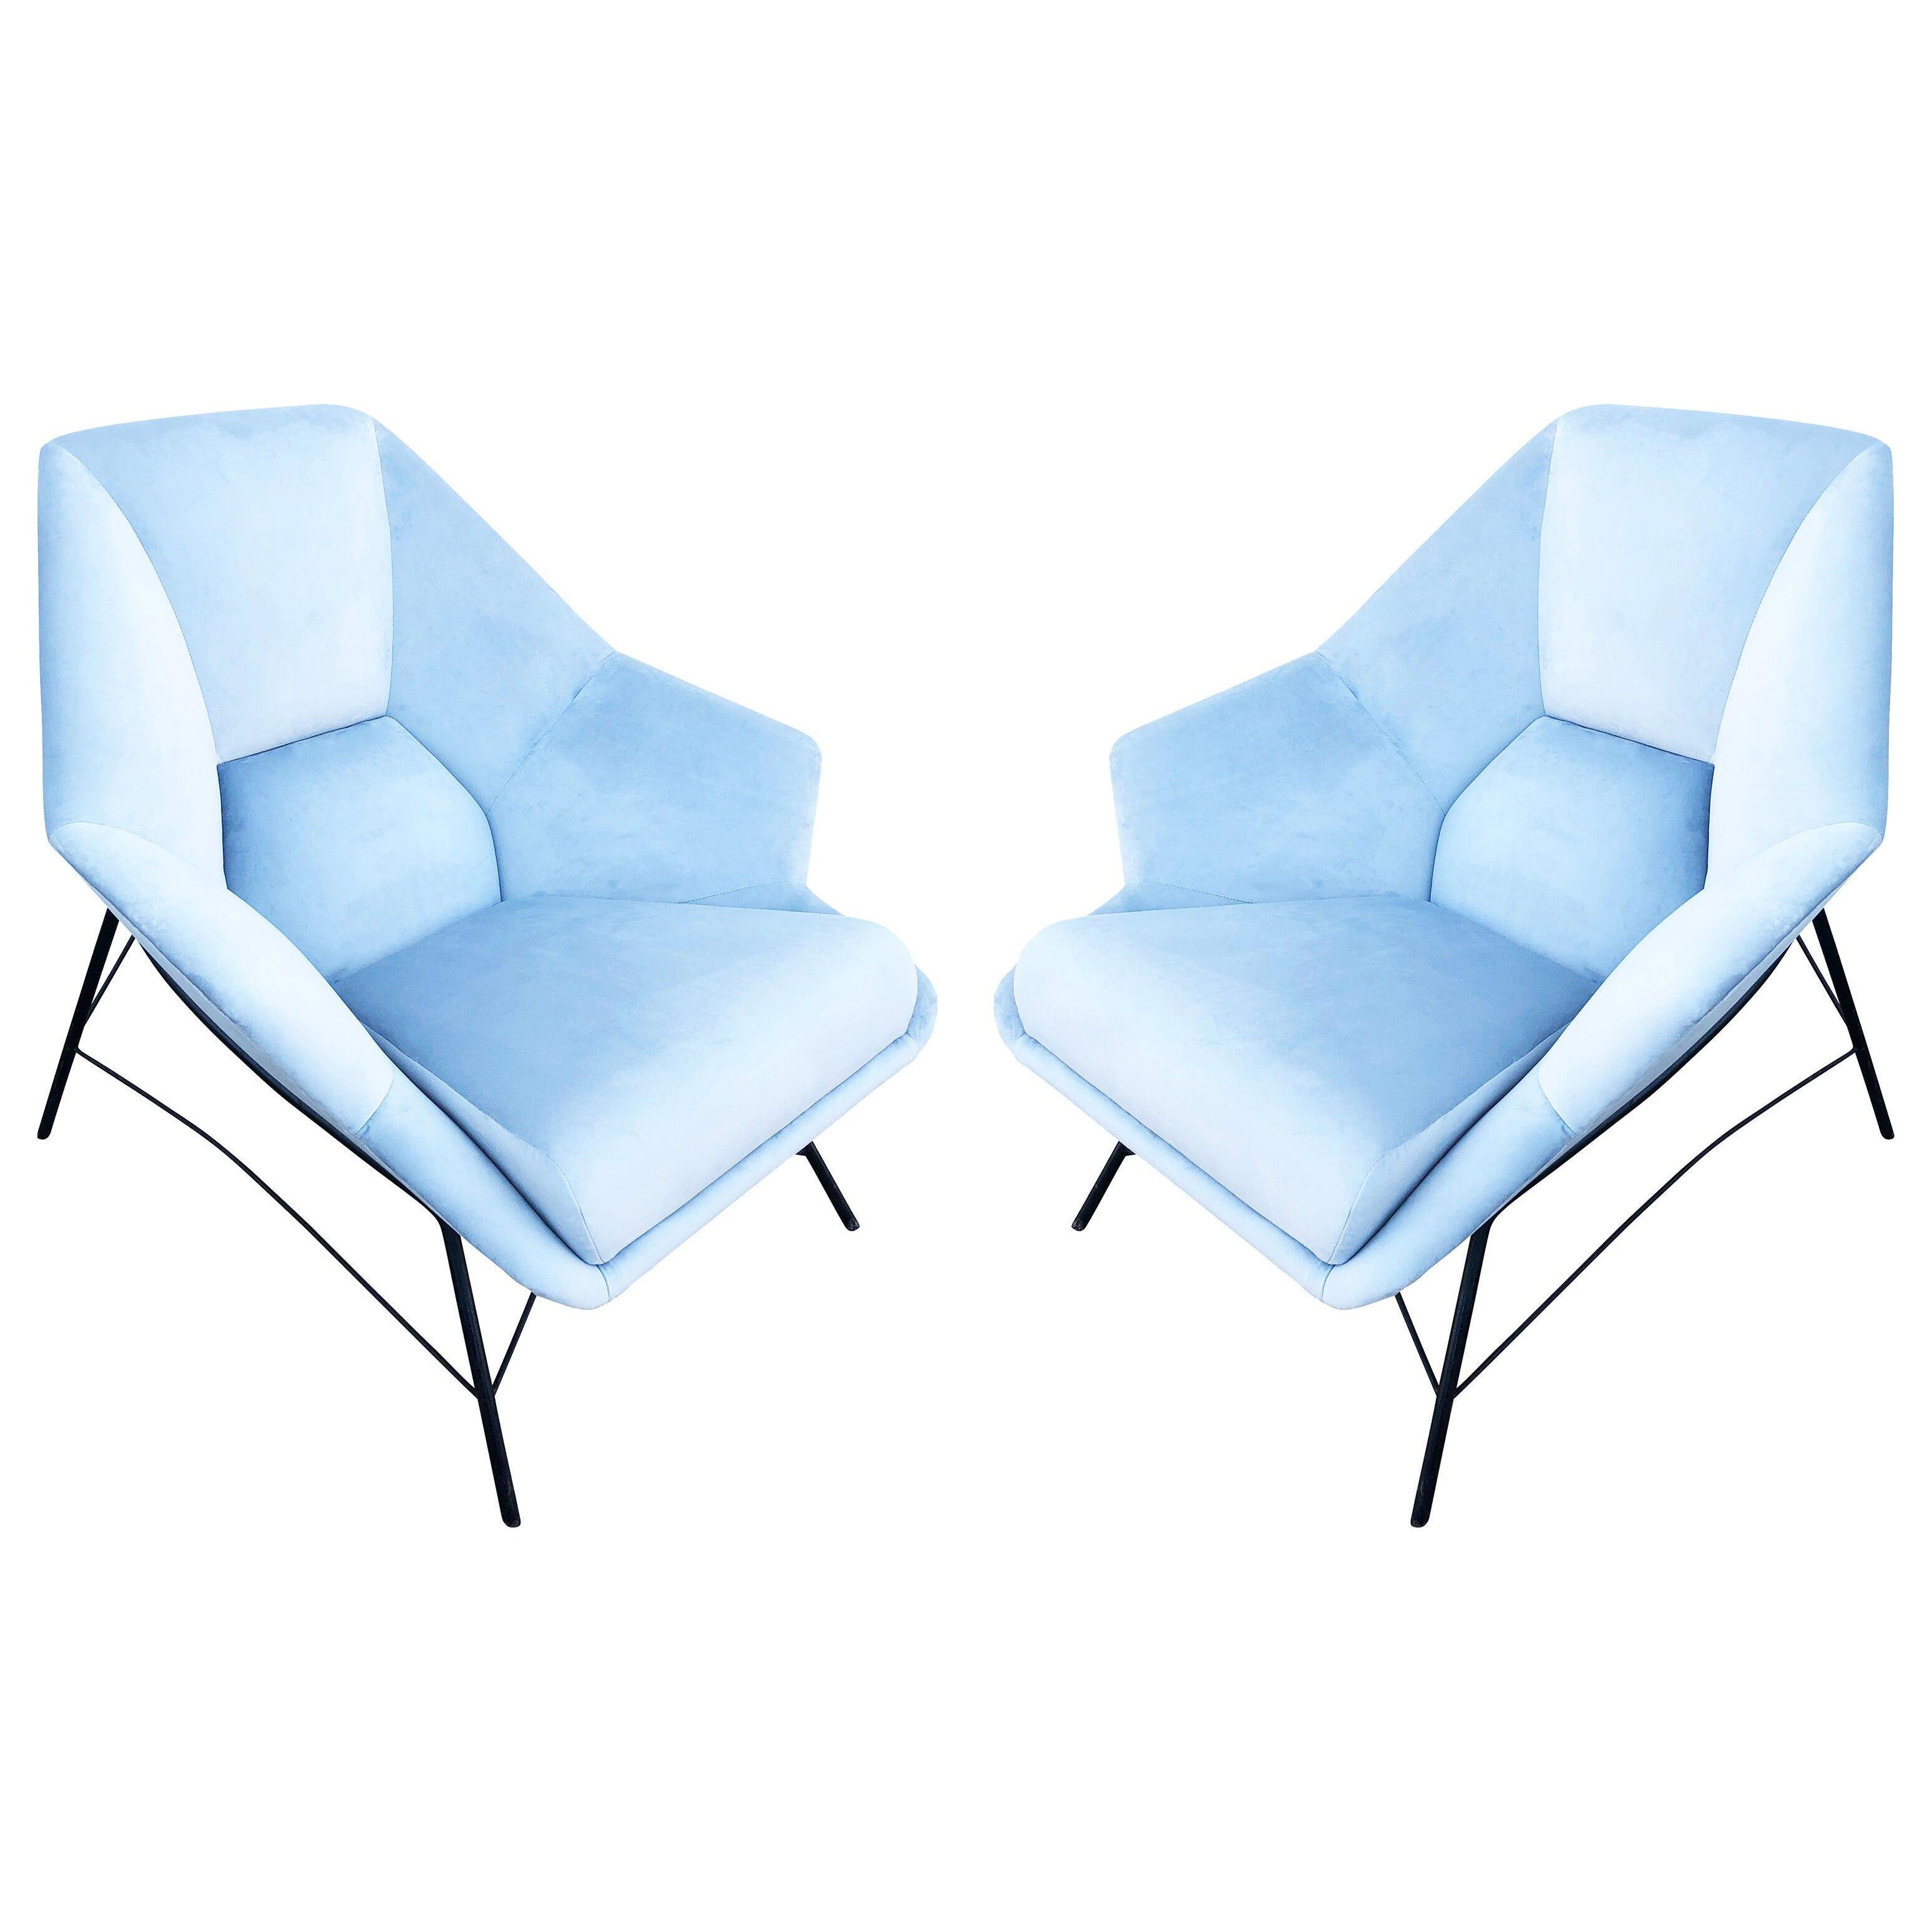 Pair of Sculptural Italian Lounge Chairs, 1960s